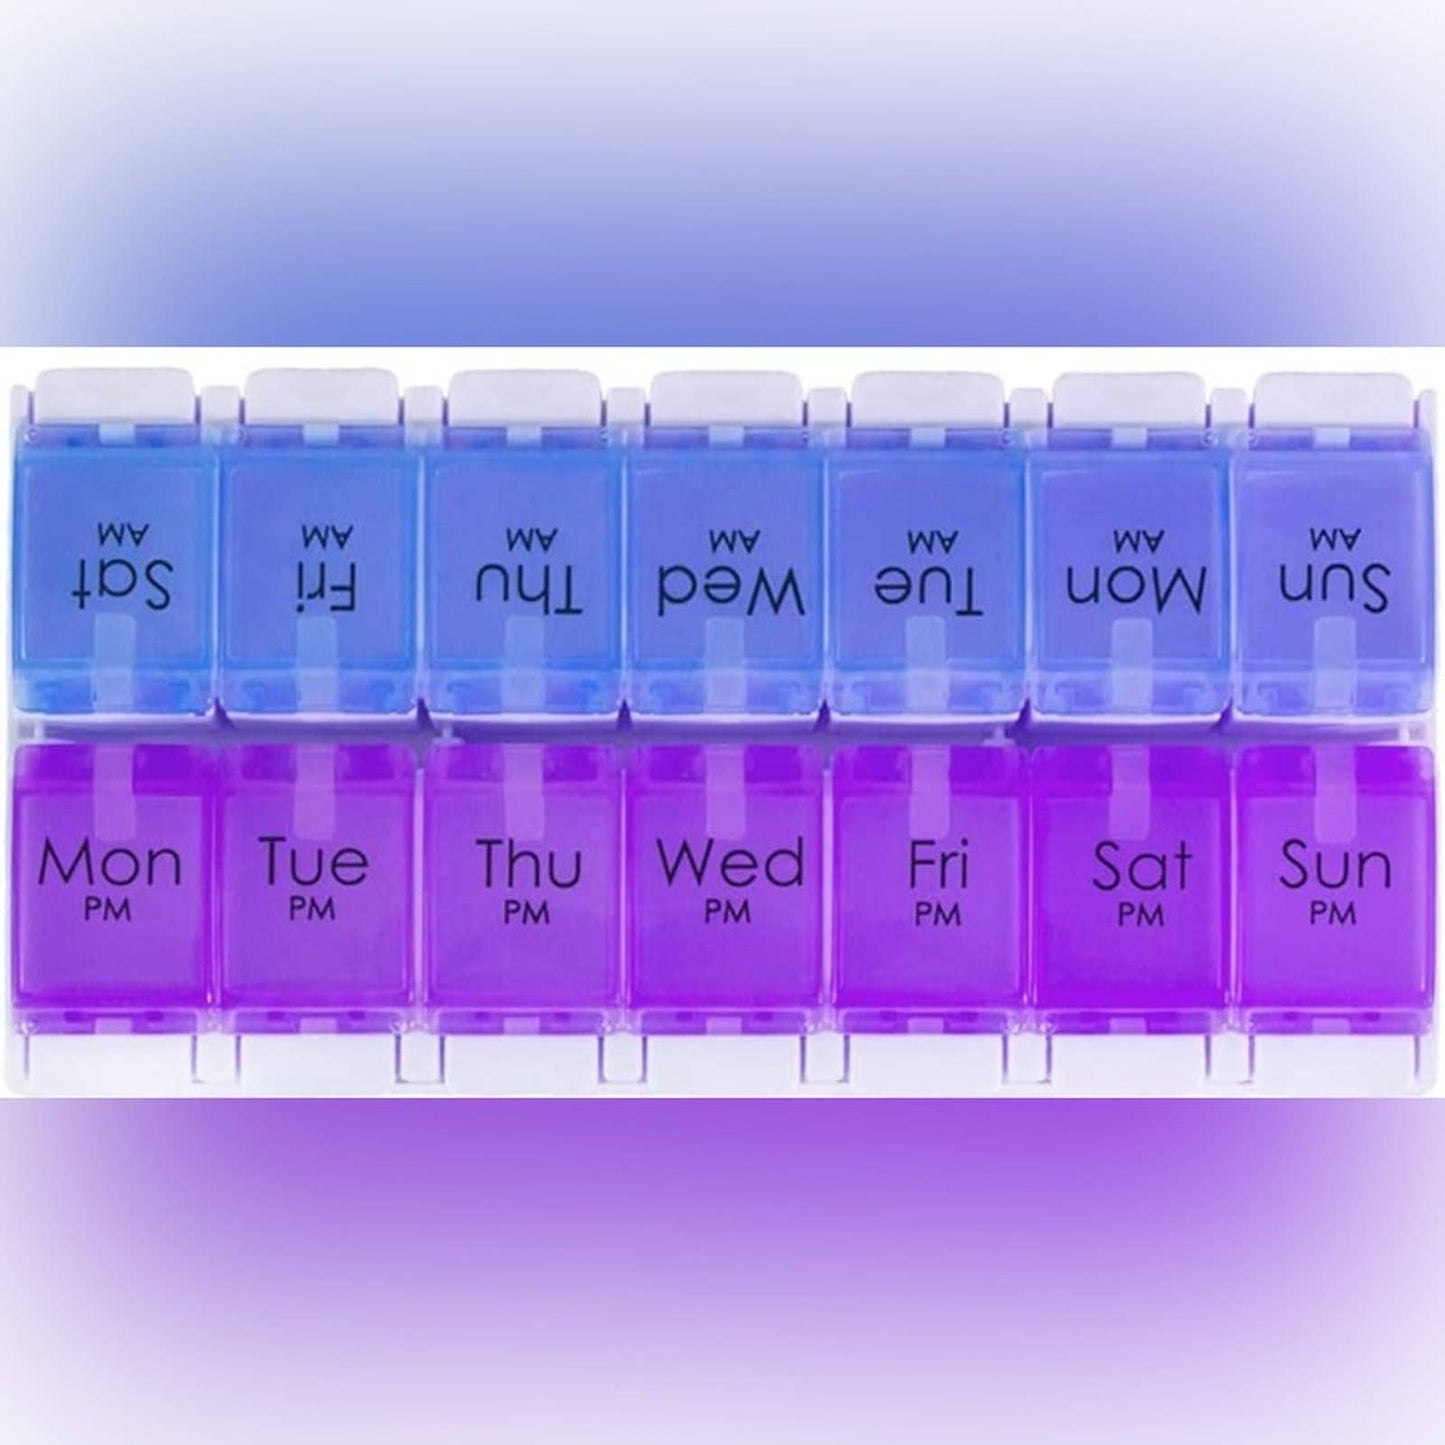 Daily Vitamin Box AM PM Pill Case Organizer Weekly Pop Up 7 Day (5.Purple/Blue)